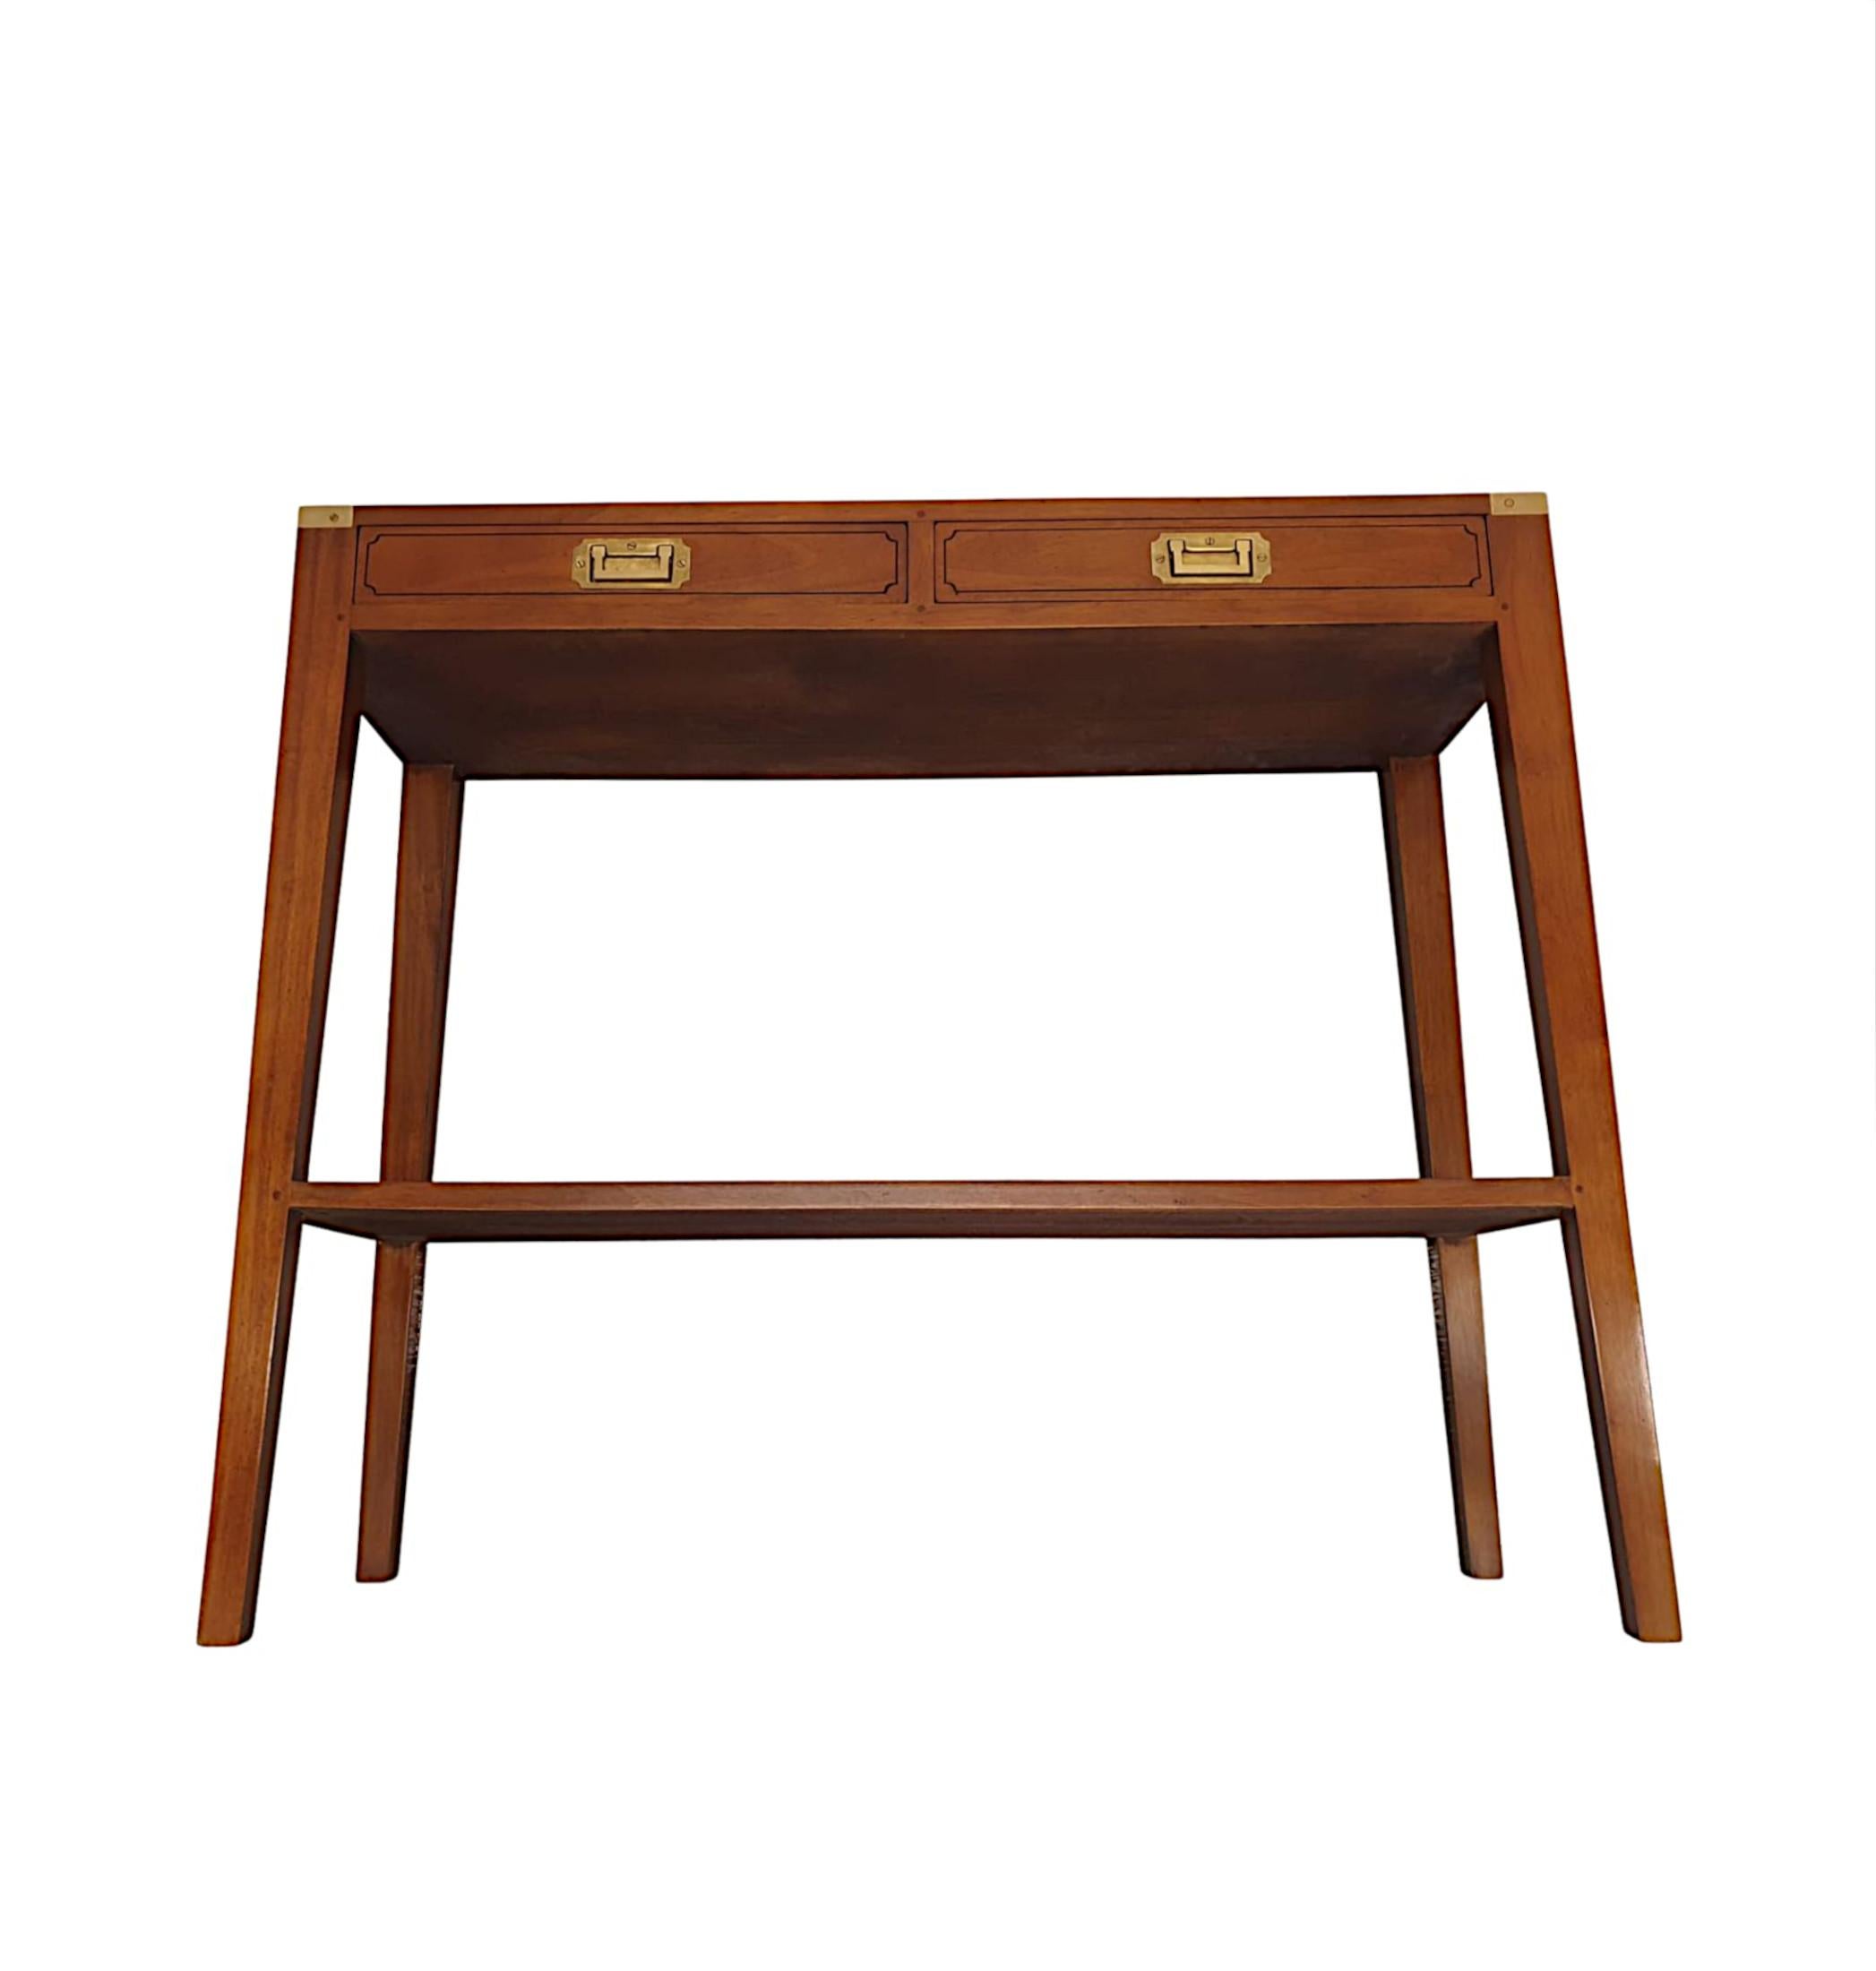 Brass A Fine Campaign Style Cherrywood Console Table For Sale